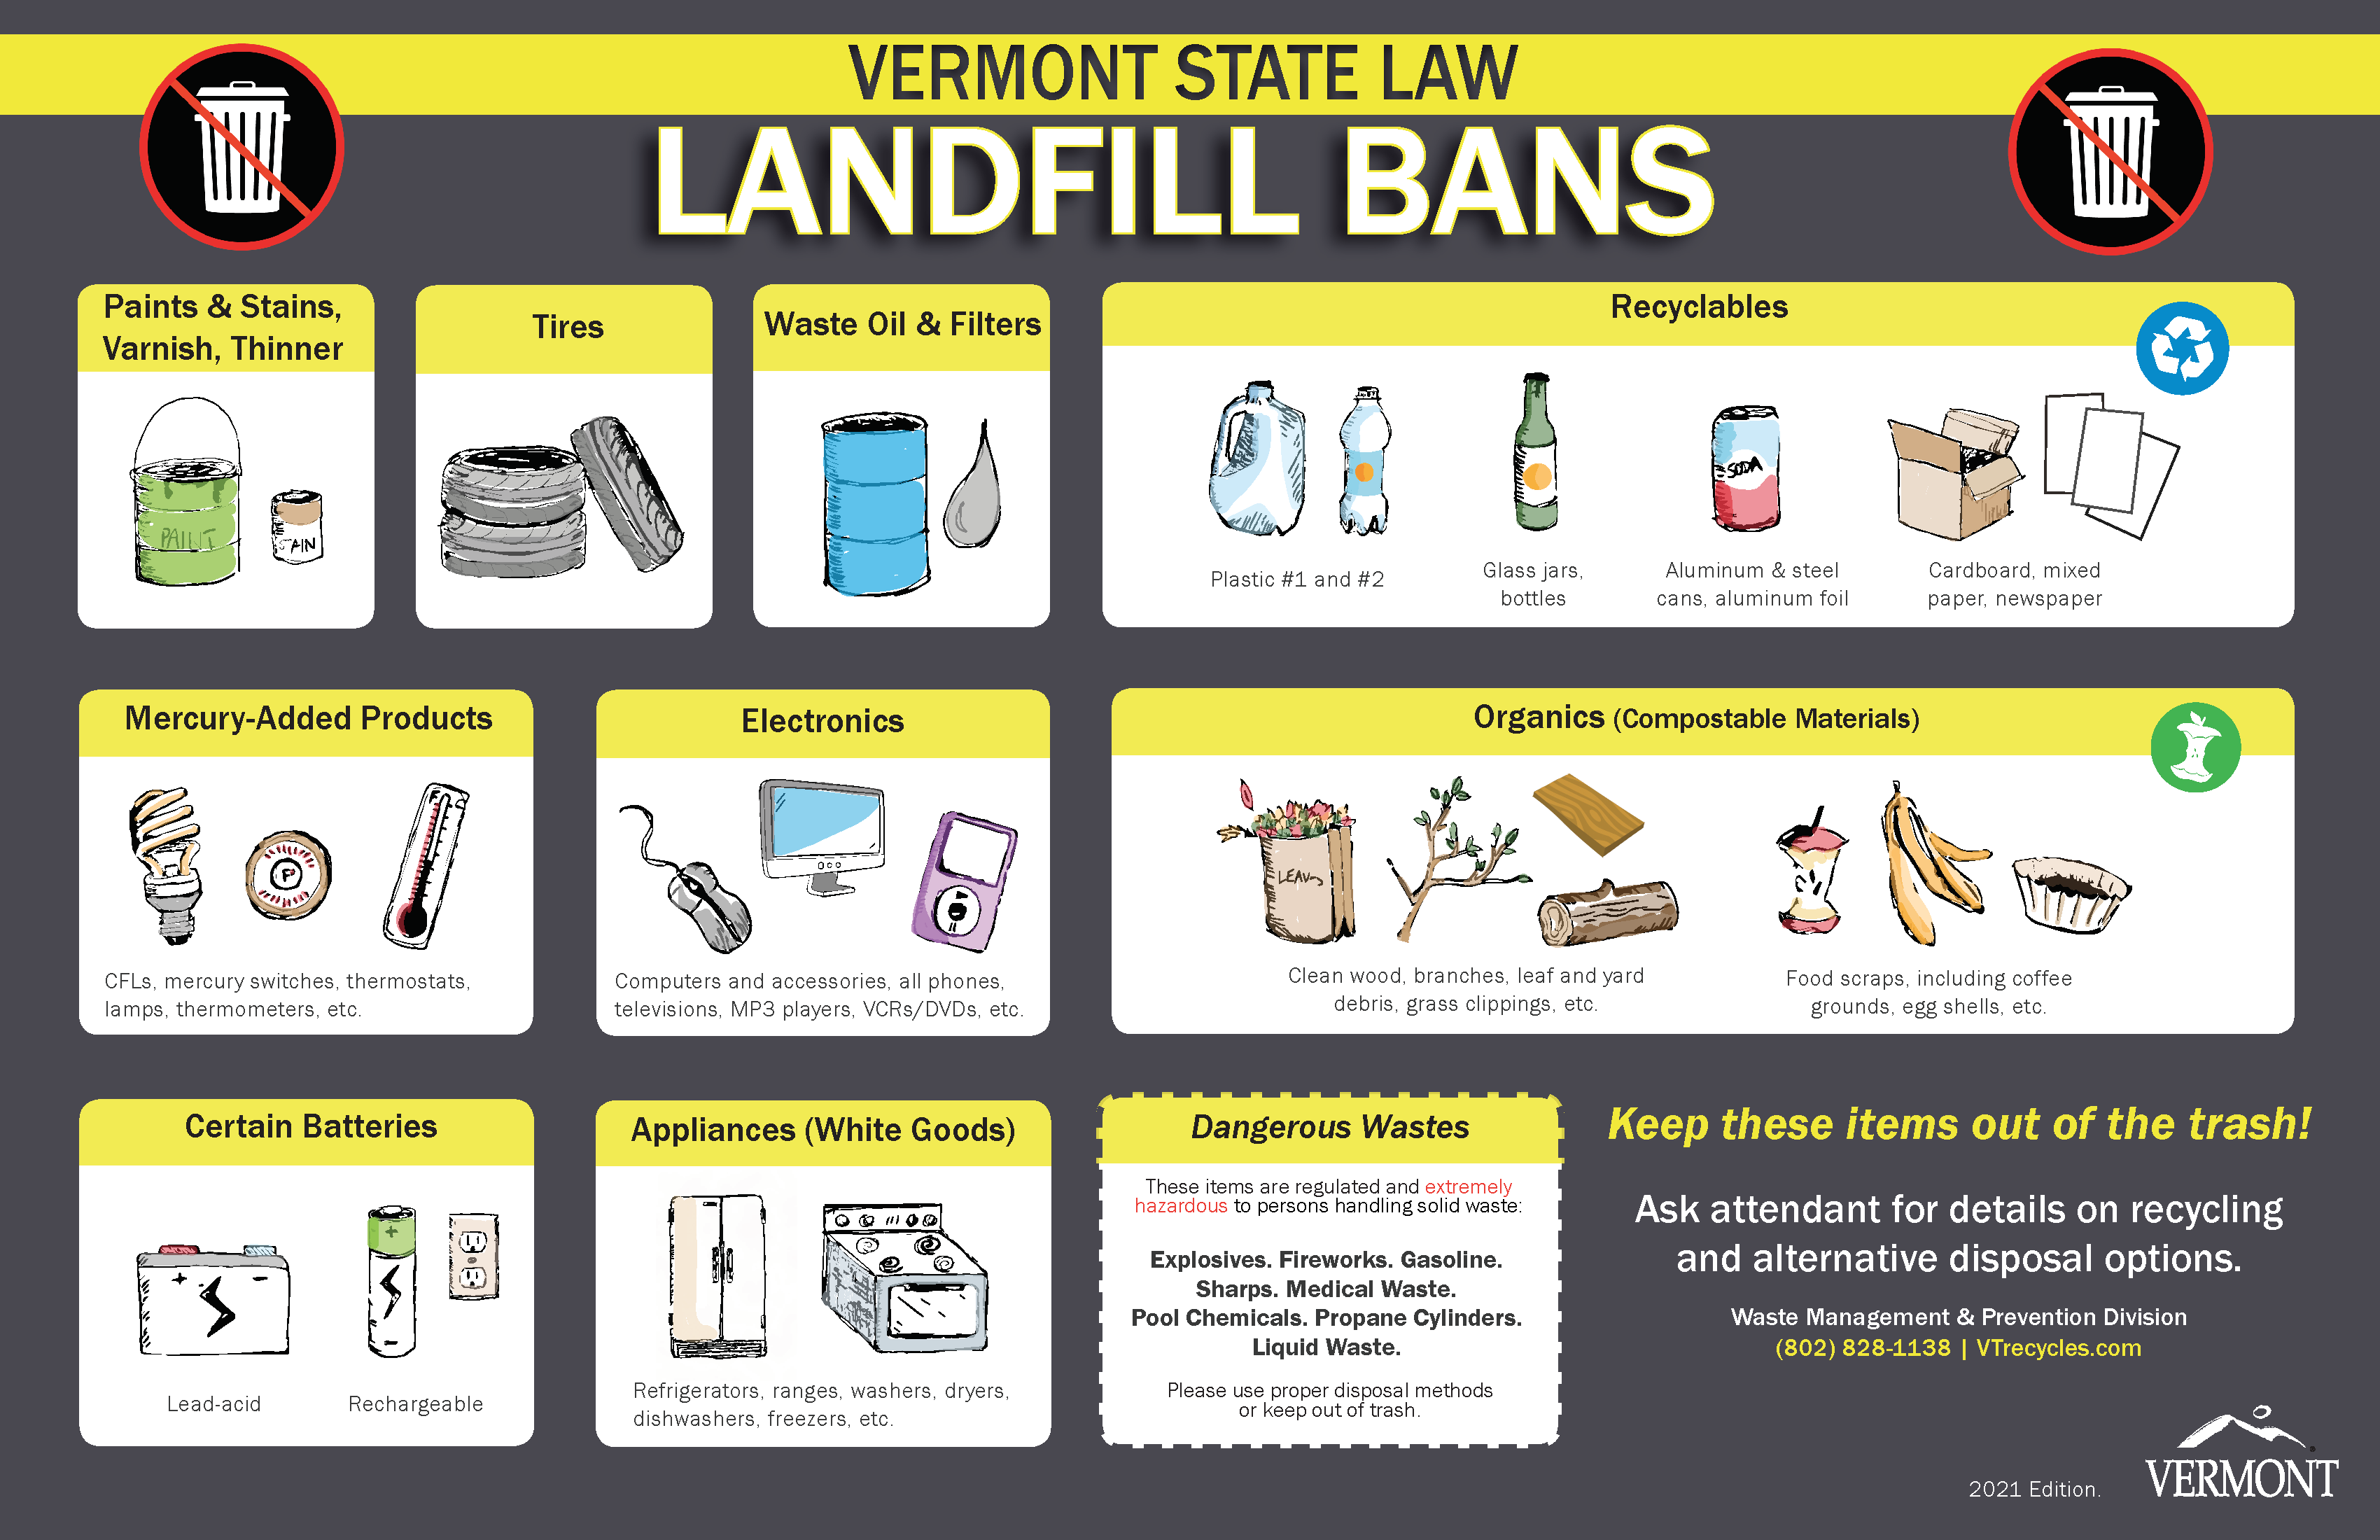 Items banned from Vermont landfills